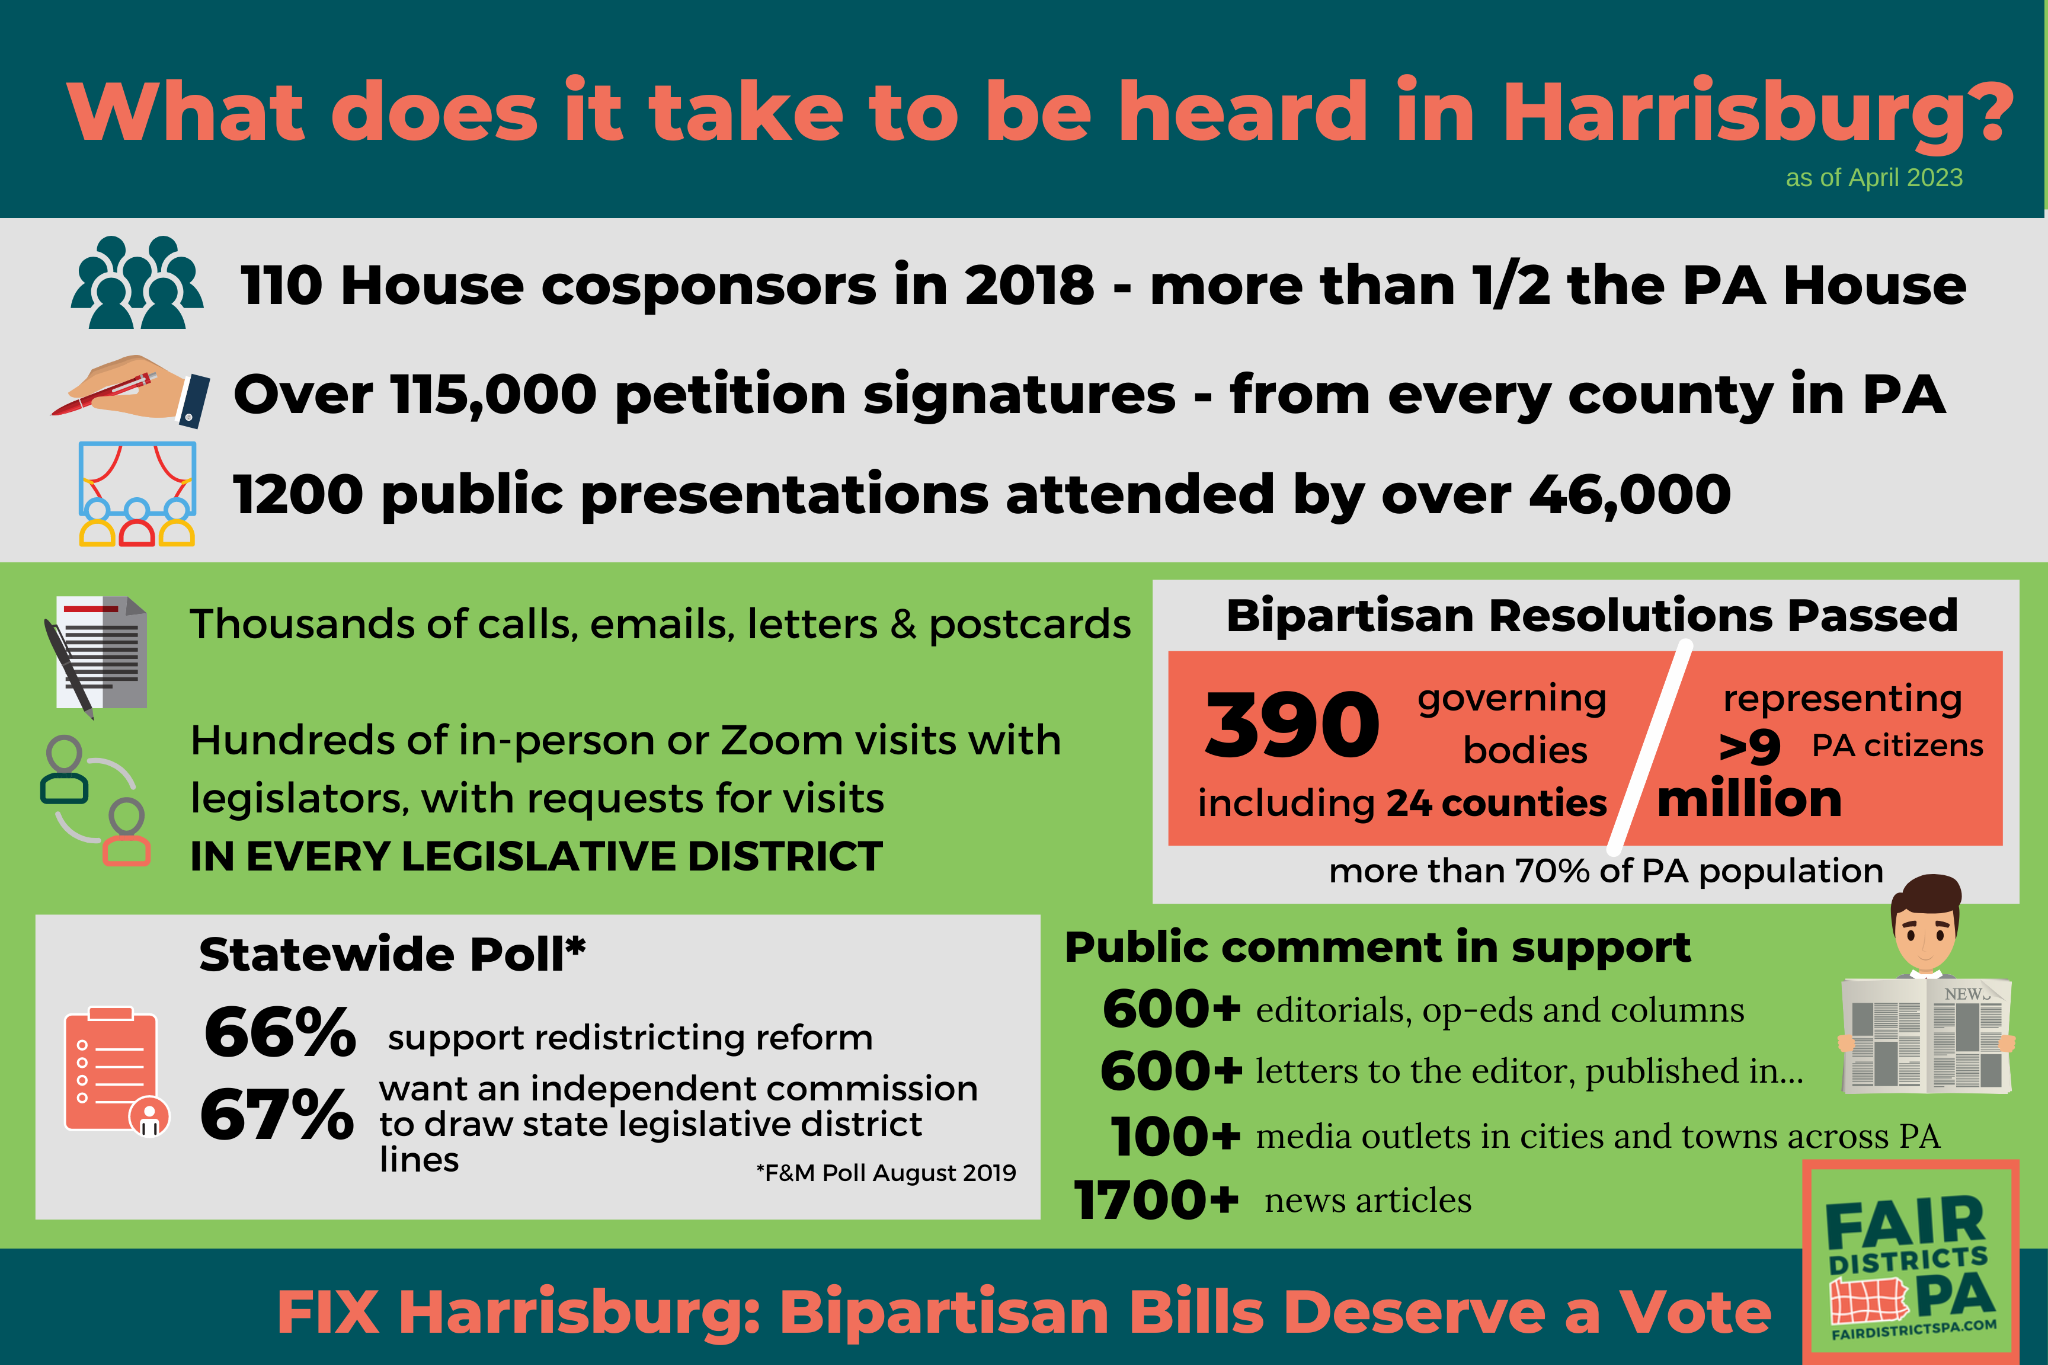 What does it take to be heard in Harrisburg